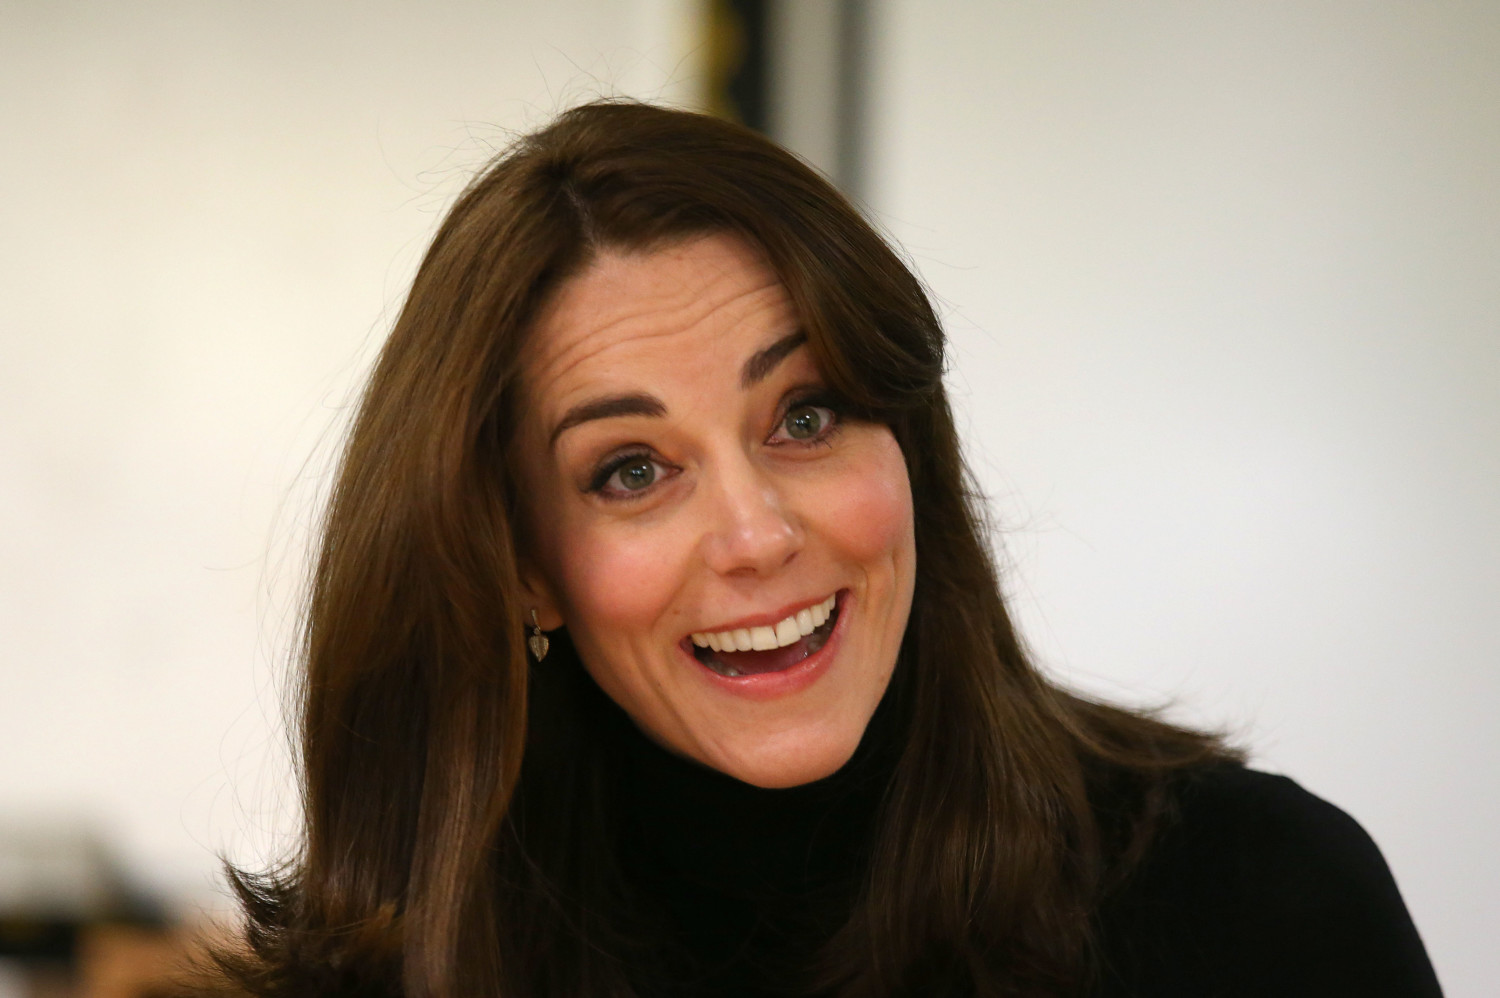 Britain's Kate, the Duchess of Cambridge, smiles as she joins headteachers from schools in Edinburgh during a visit to the Place2Be charity at Catherine's Primary School in Edinburgh, on Wednesday, Feb. 24, 2016. (Andrew Millingan/ Pool photo via AP)